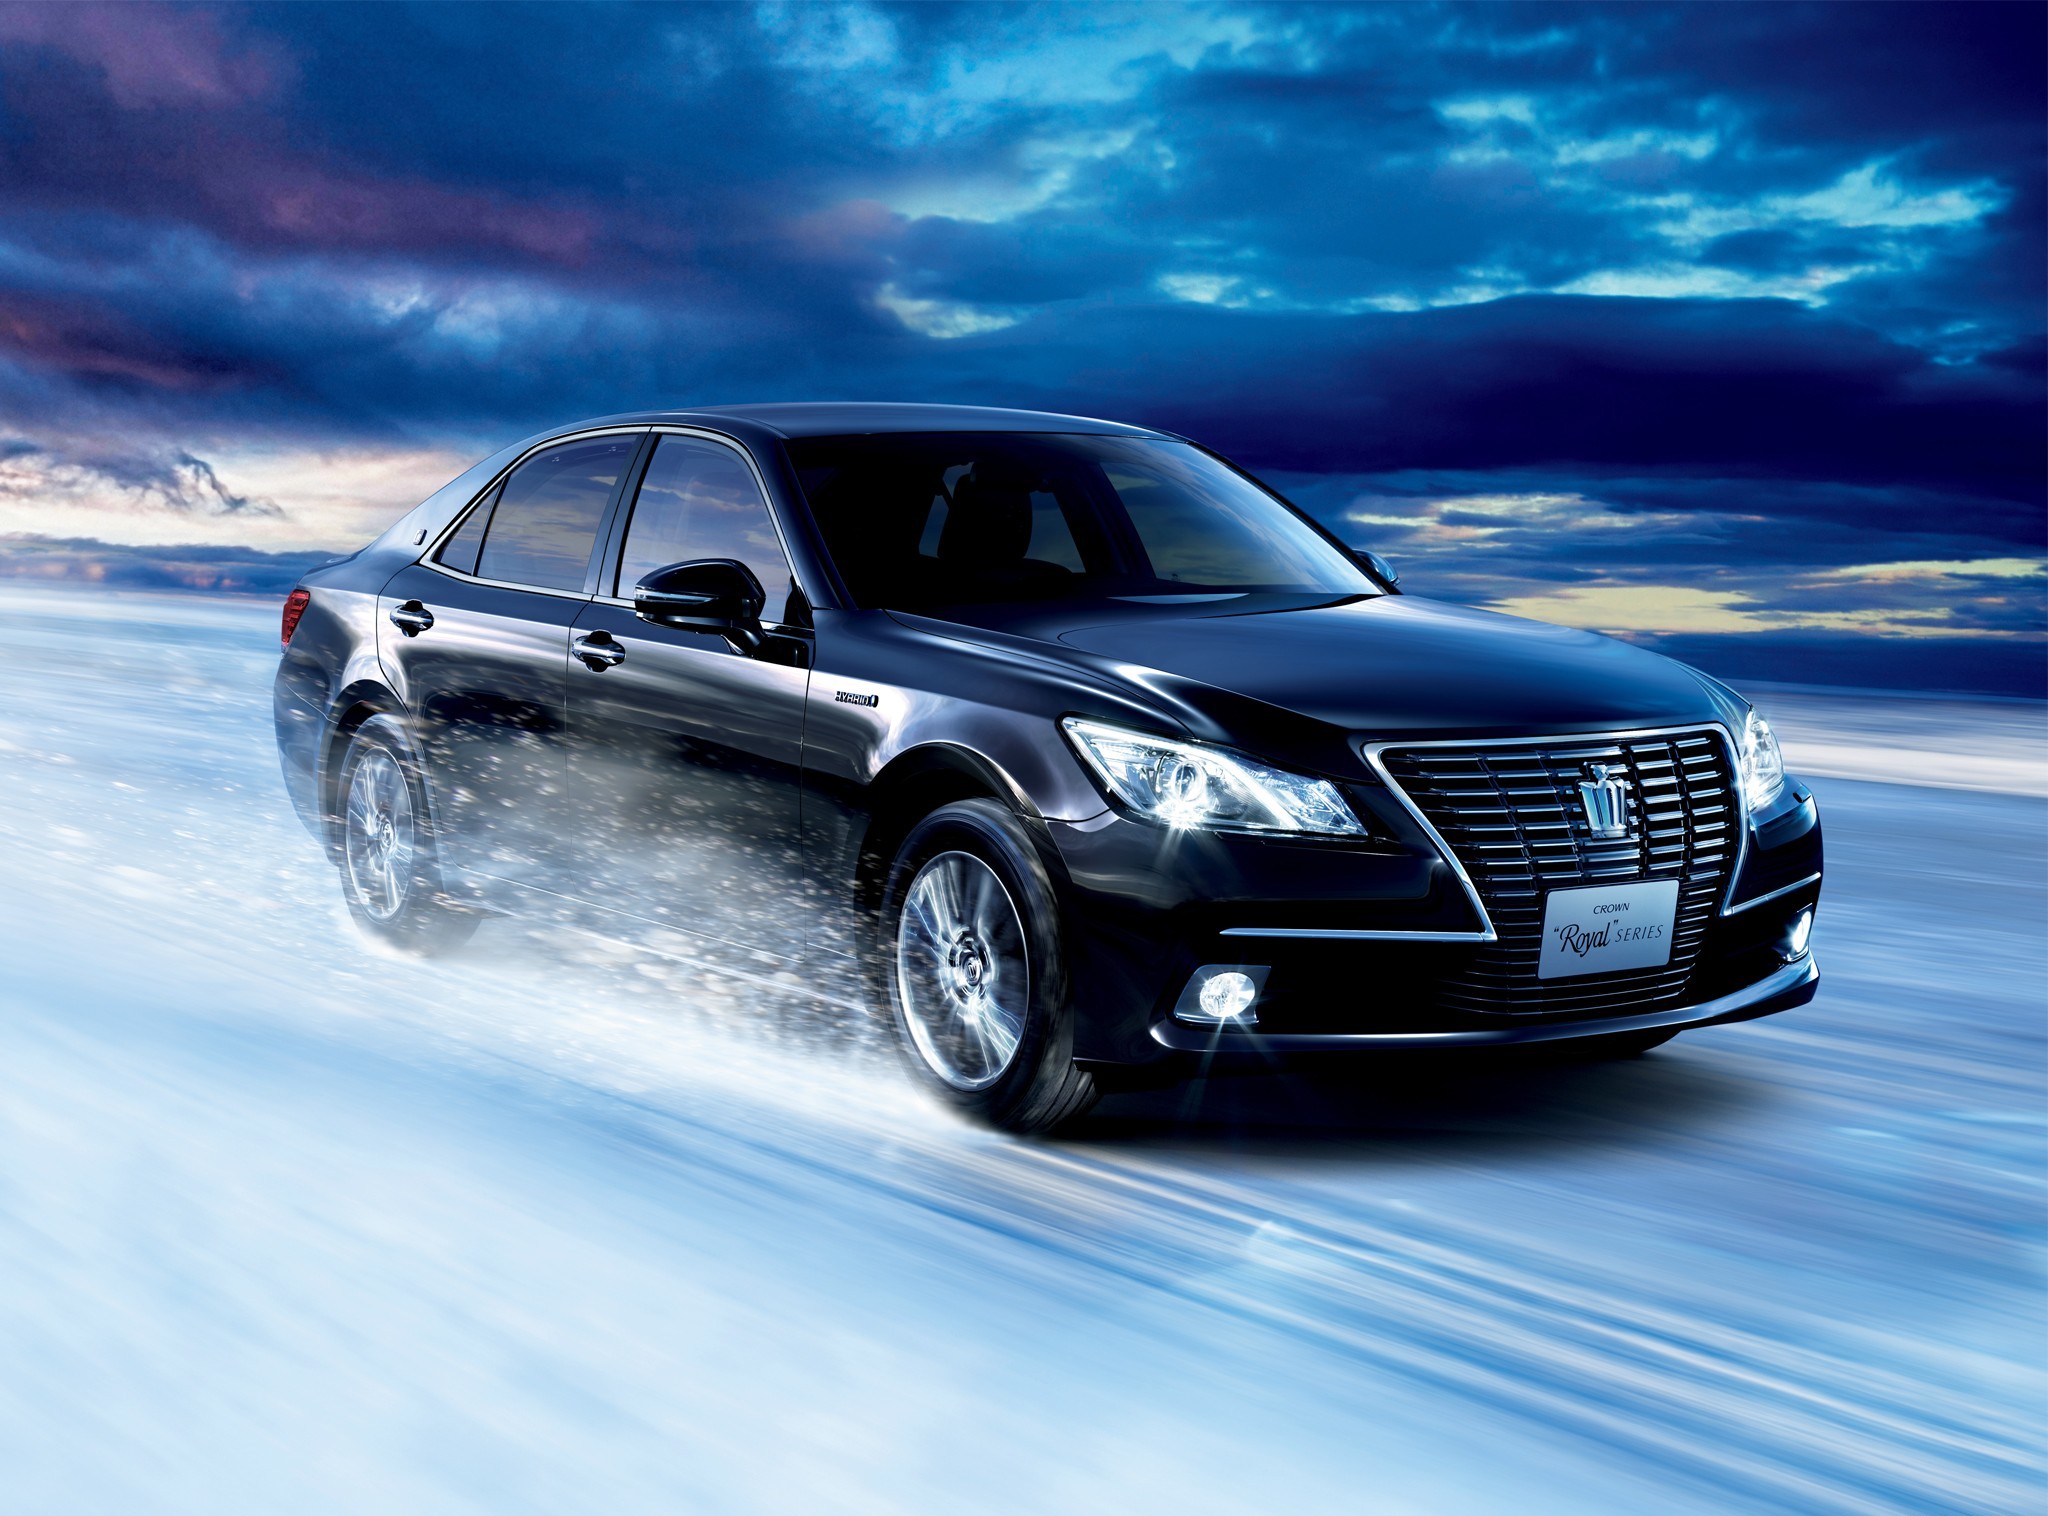 Toyota Crown HD Wallpaper | Background Image | 2048x1516